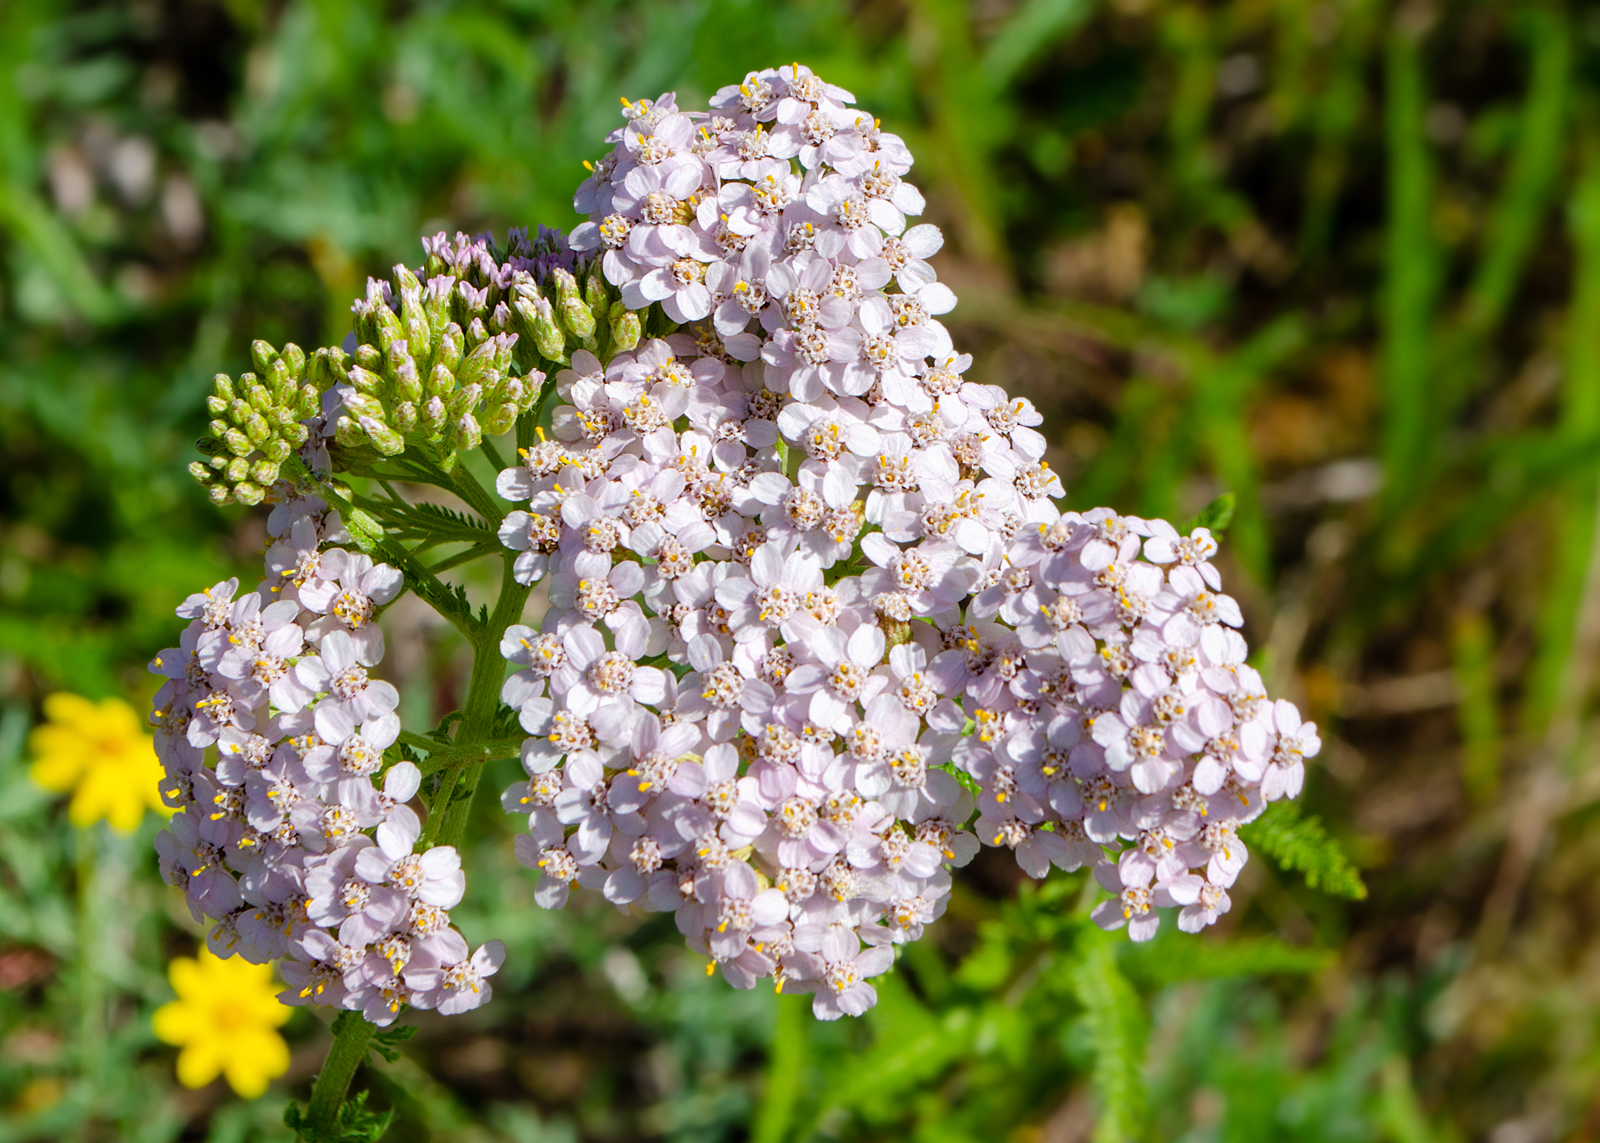 Wanderin' Weeta (With Waterfowl and Weeds): Yarrow, white and pink